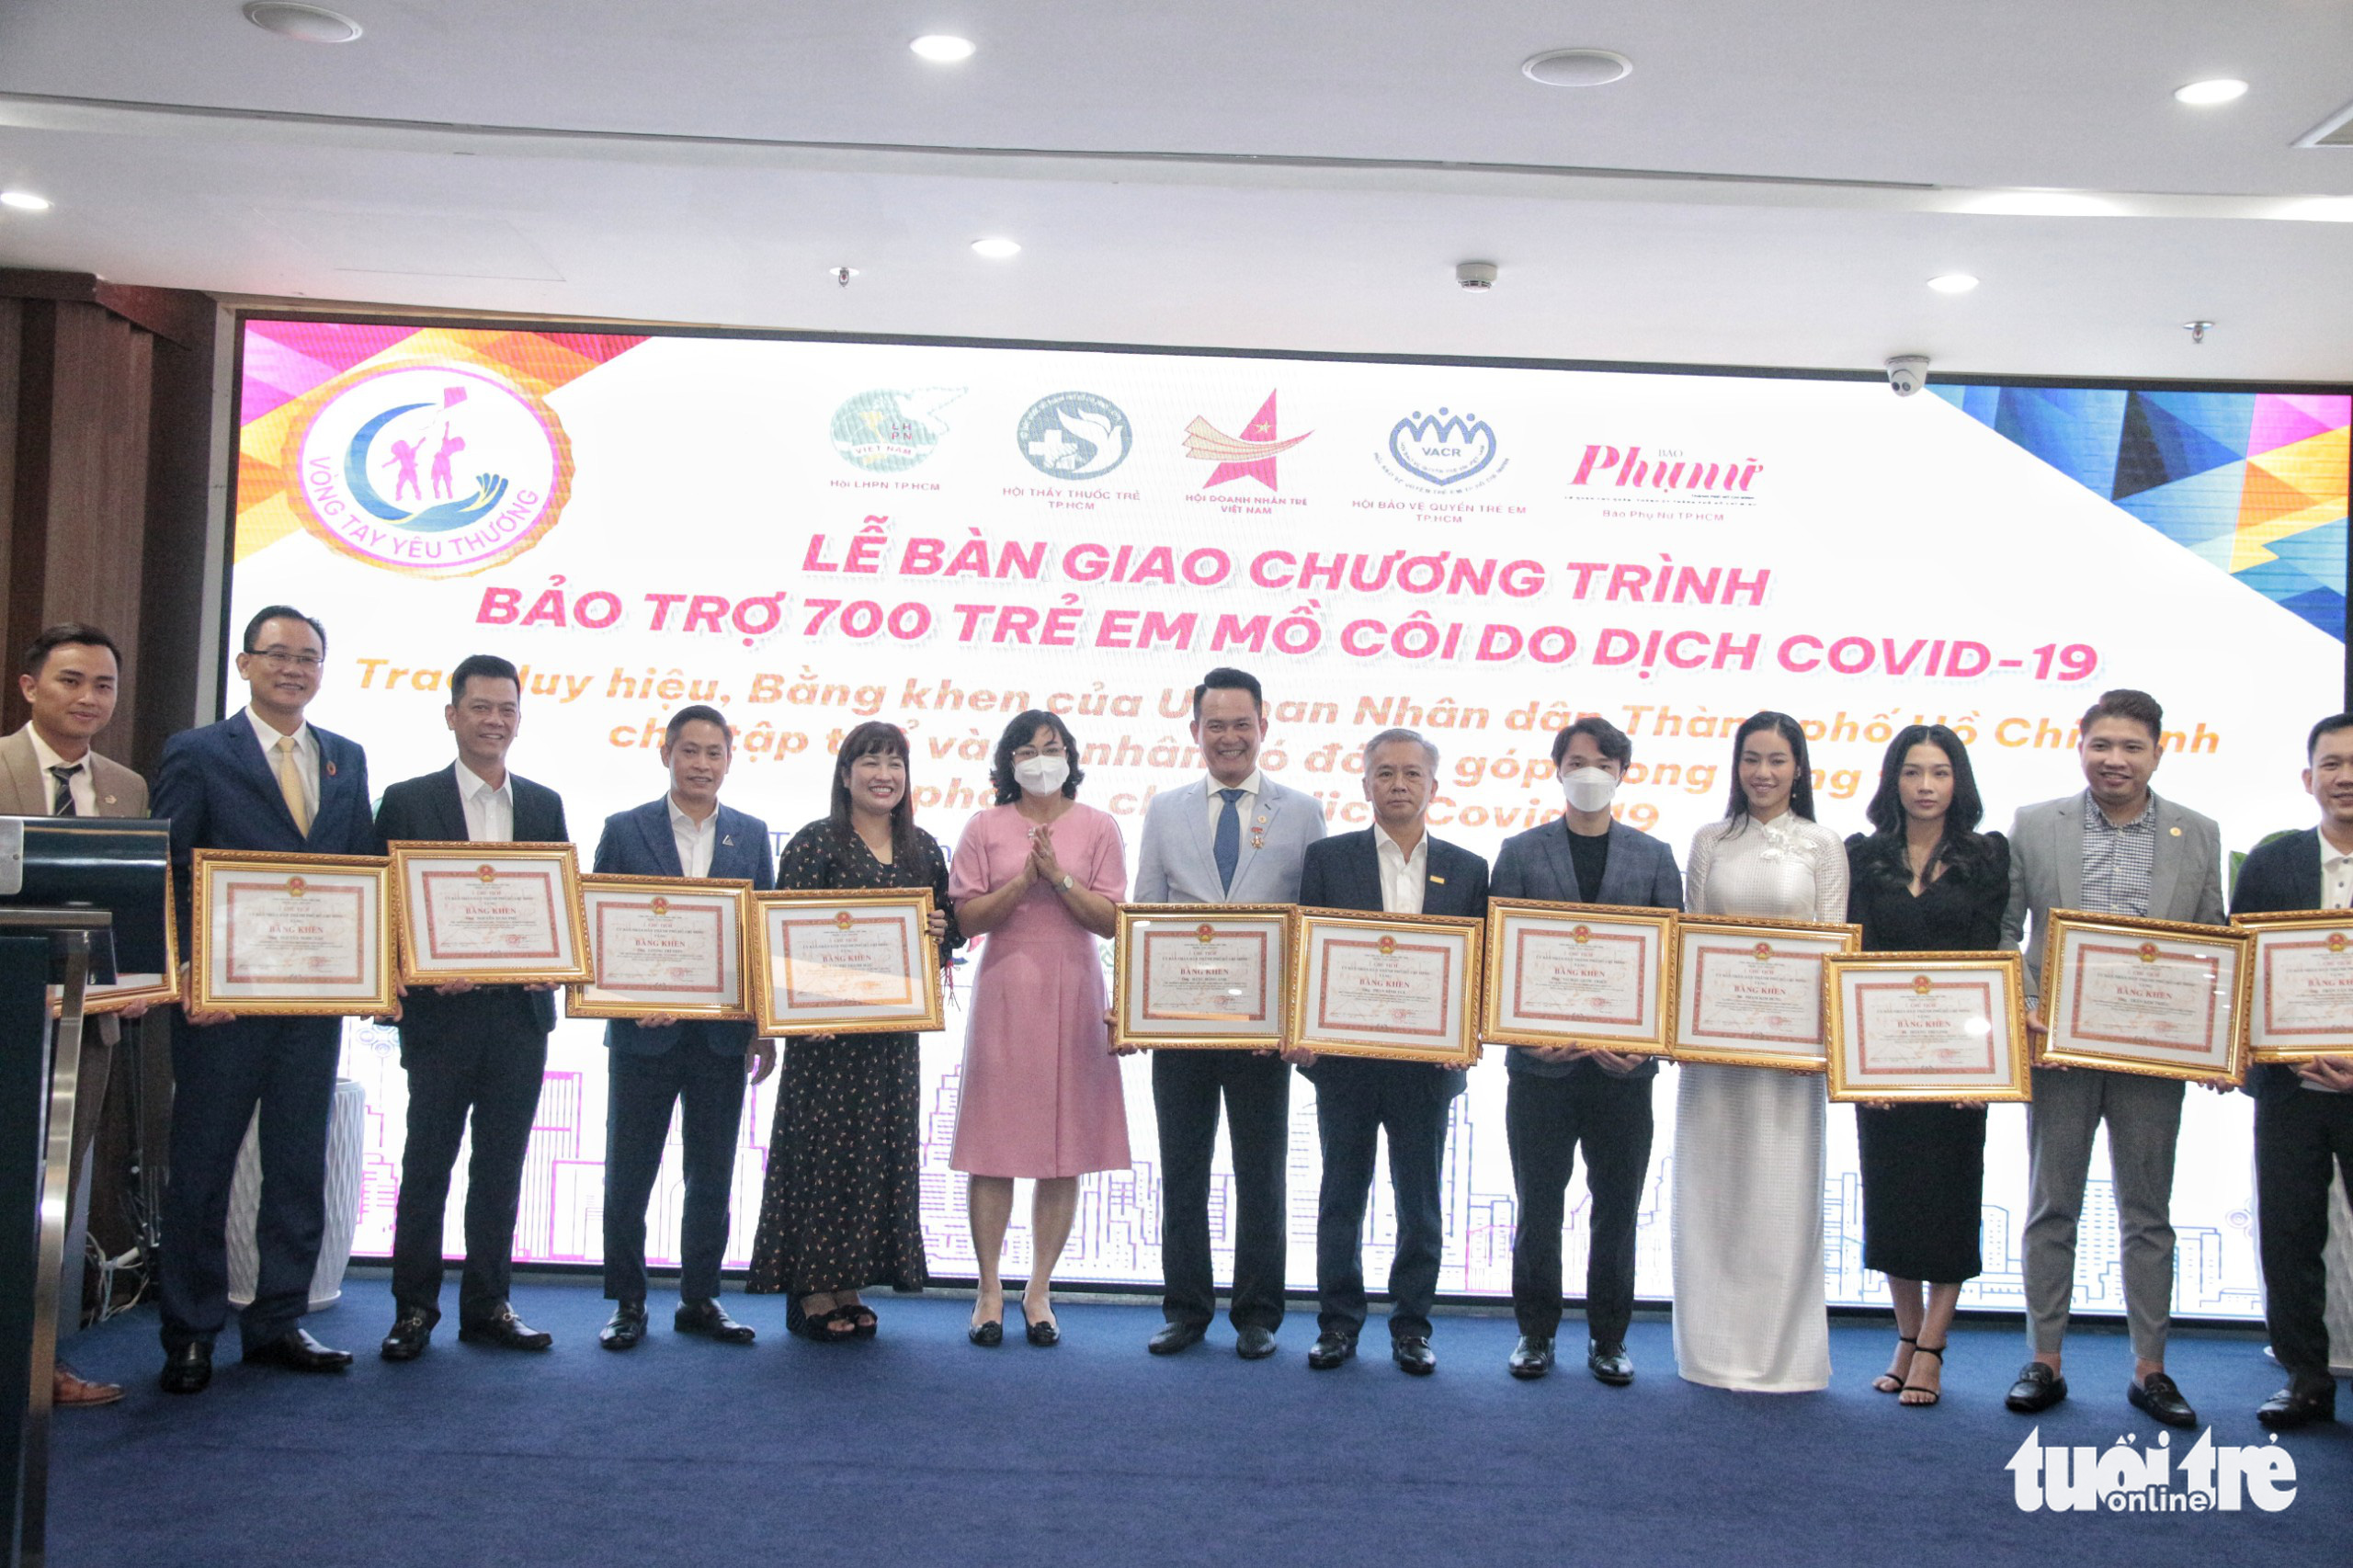 Individuals and representatives of organizations receive certificates of merit from the Ho Chi Minh City People’s Committee during a sponsorship event in Ho Chi Minh City, December 21, 2021. Photo: Cong Trieu / Tuoi Tre